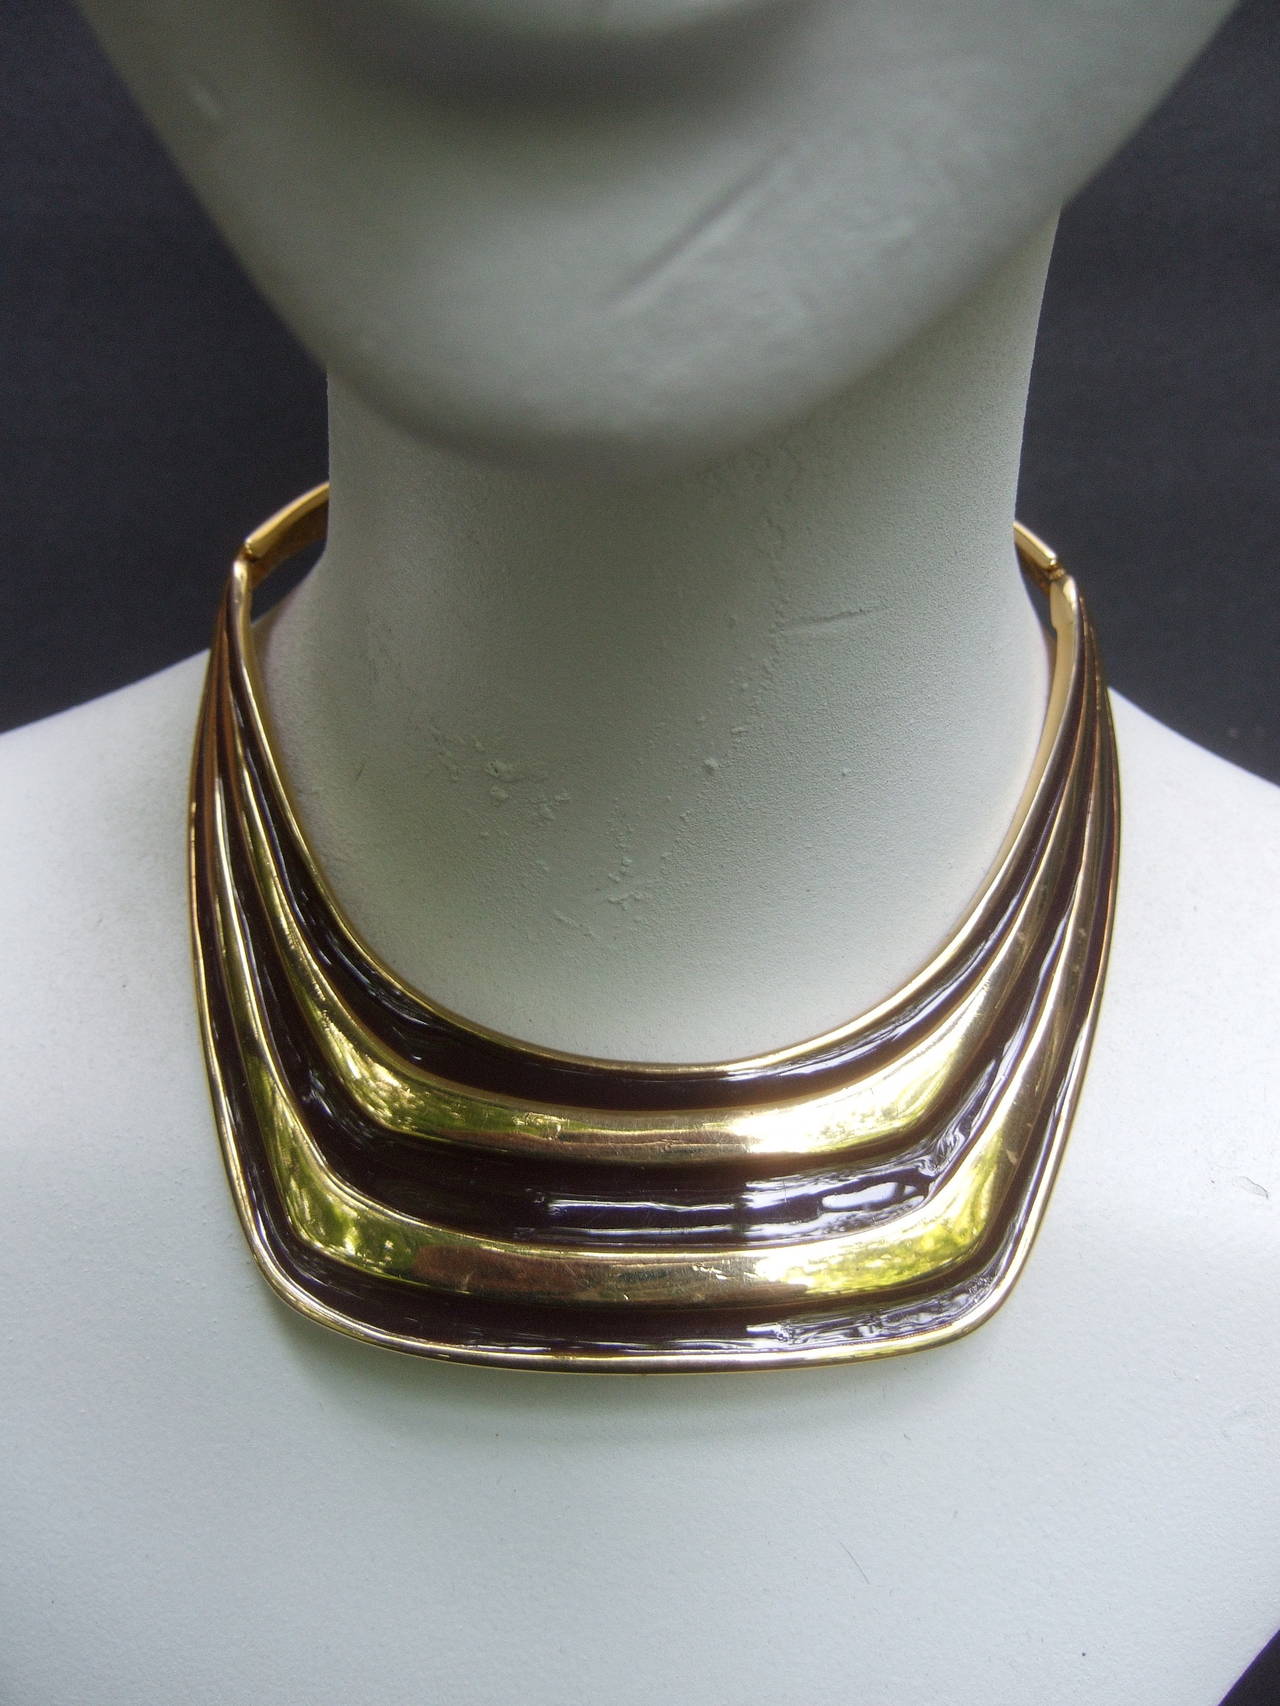 Alexis Kirk Sleek Brown & gilt enamel choker necklace set c 1980
The mod gilt metal choker necklace is accented with lacquered 
brown enamel high gloss bands

The choker necklace is designed with matching 
large rectangular clip on